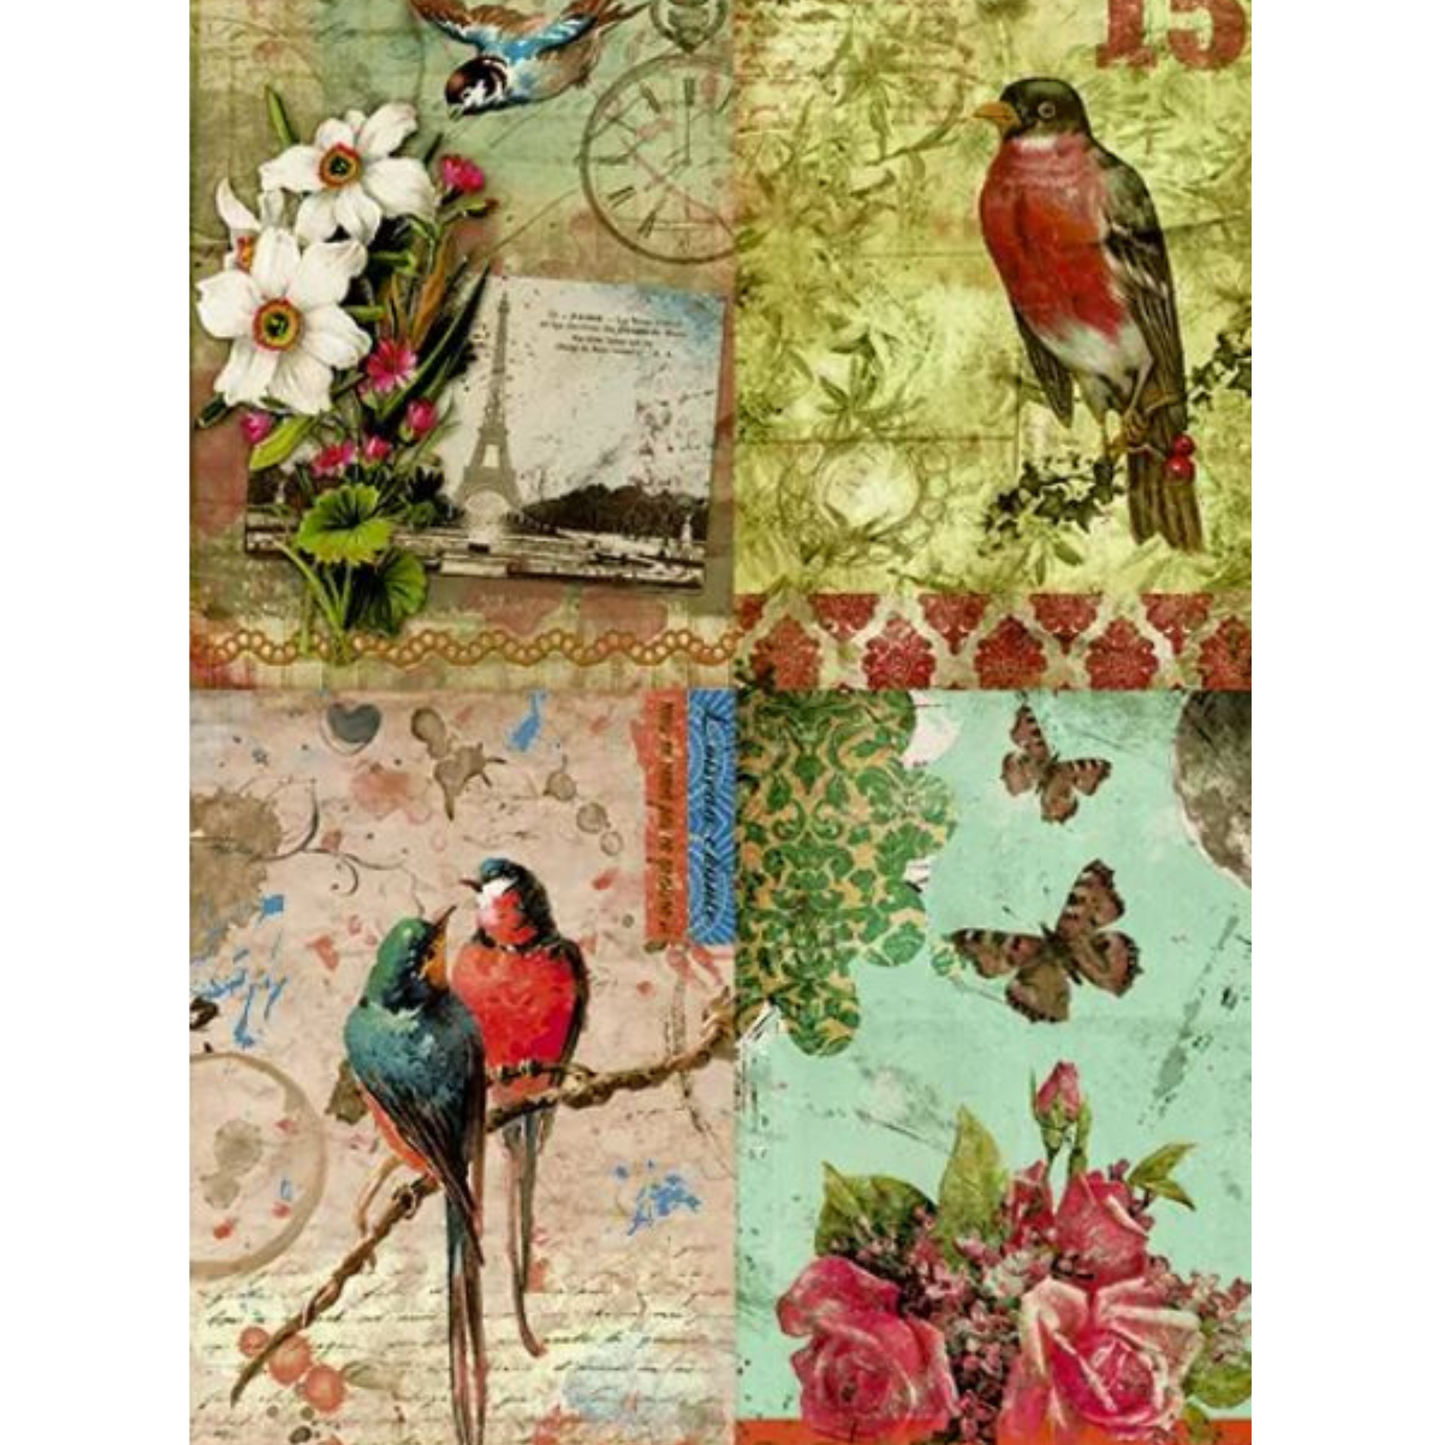 "Vintage Birds" Calambour Decoupage Rice Paper Imported from Italy by Decoupage Queen. Calambour Decoupage Rice Paper is available at Milton's Daughter.